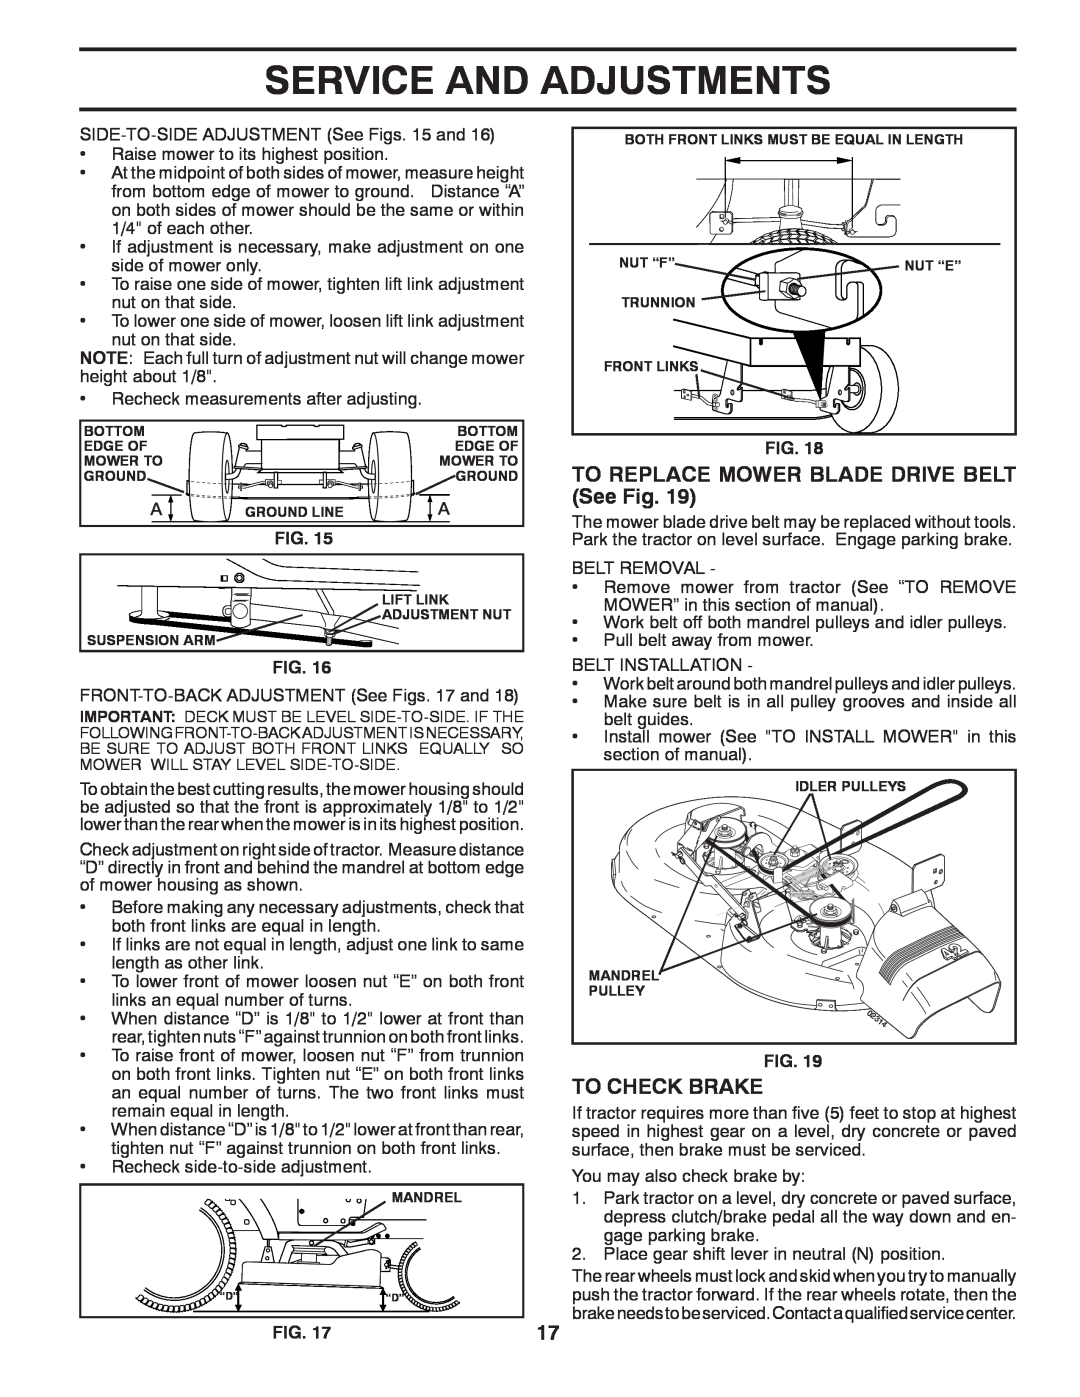 Poulan 424634 manual TO REPLACE MOWER BLADE DRIVE BELT See Fig, To Check Brake, Service And Adjustments 